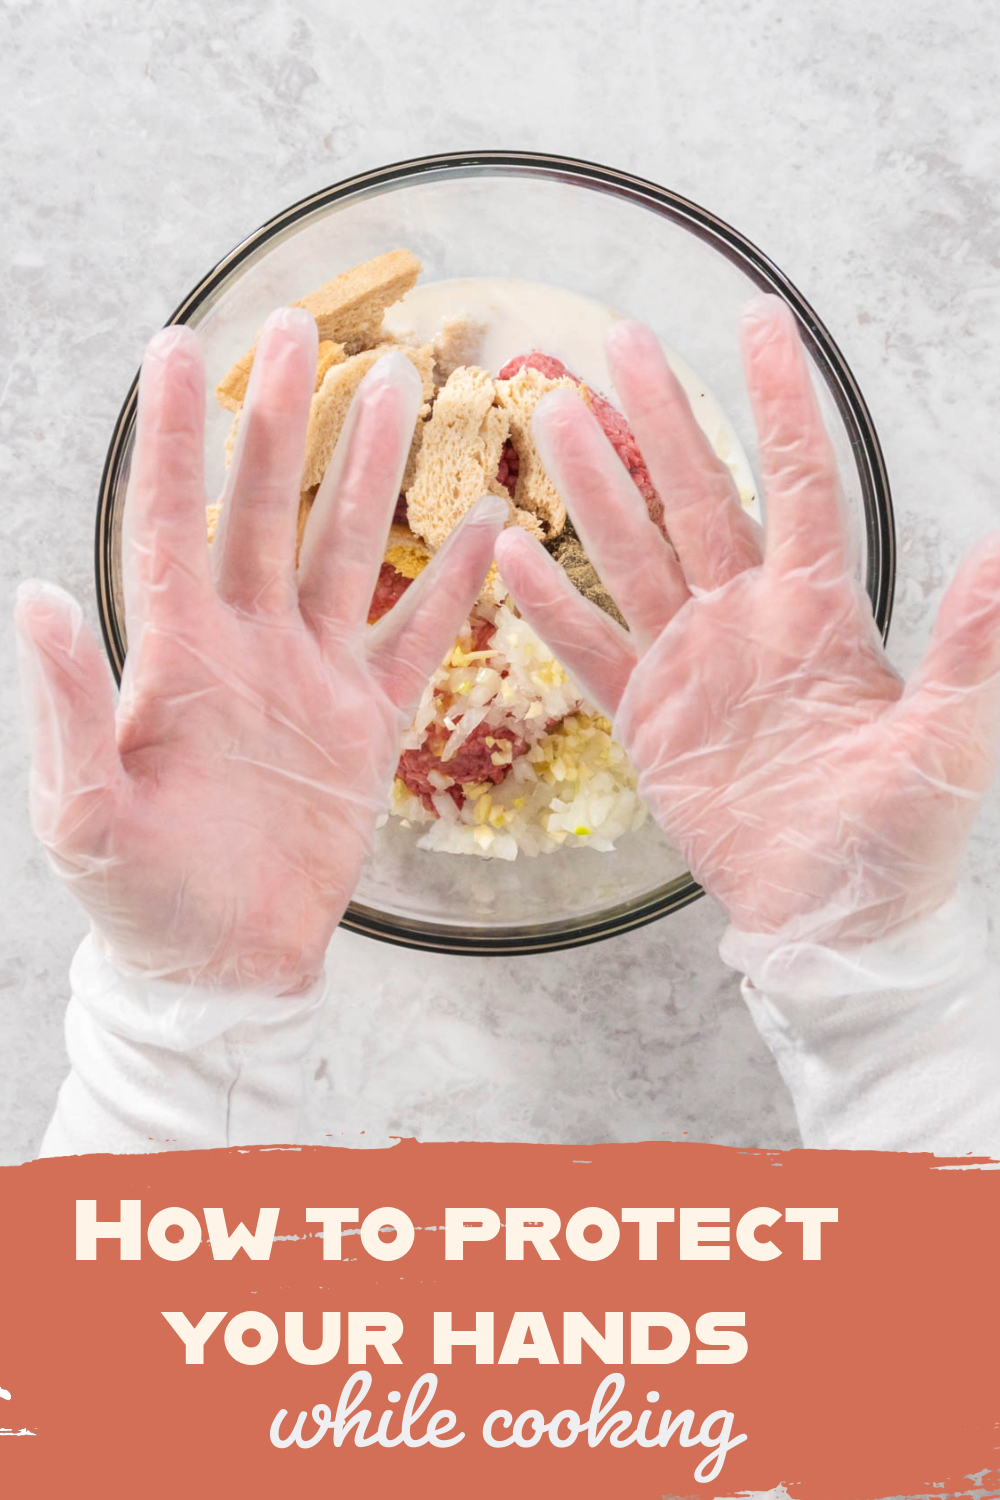 How to protect your hands while cooking